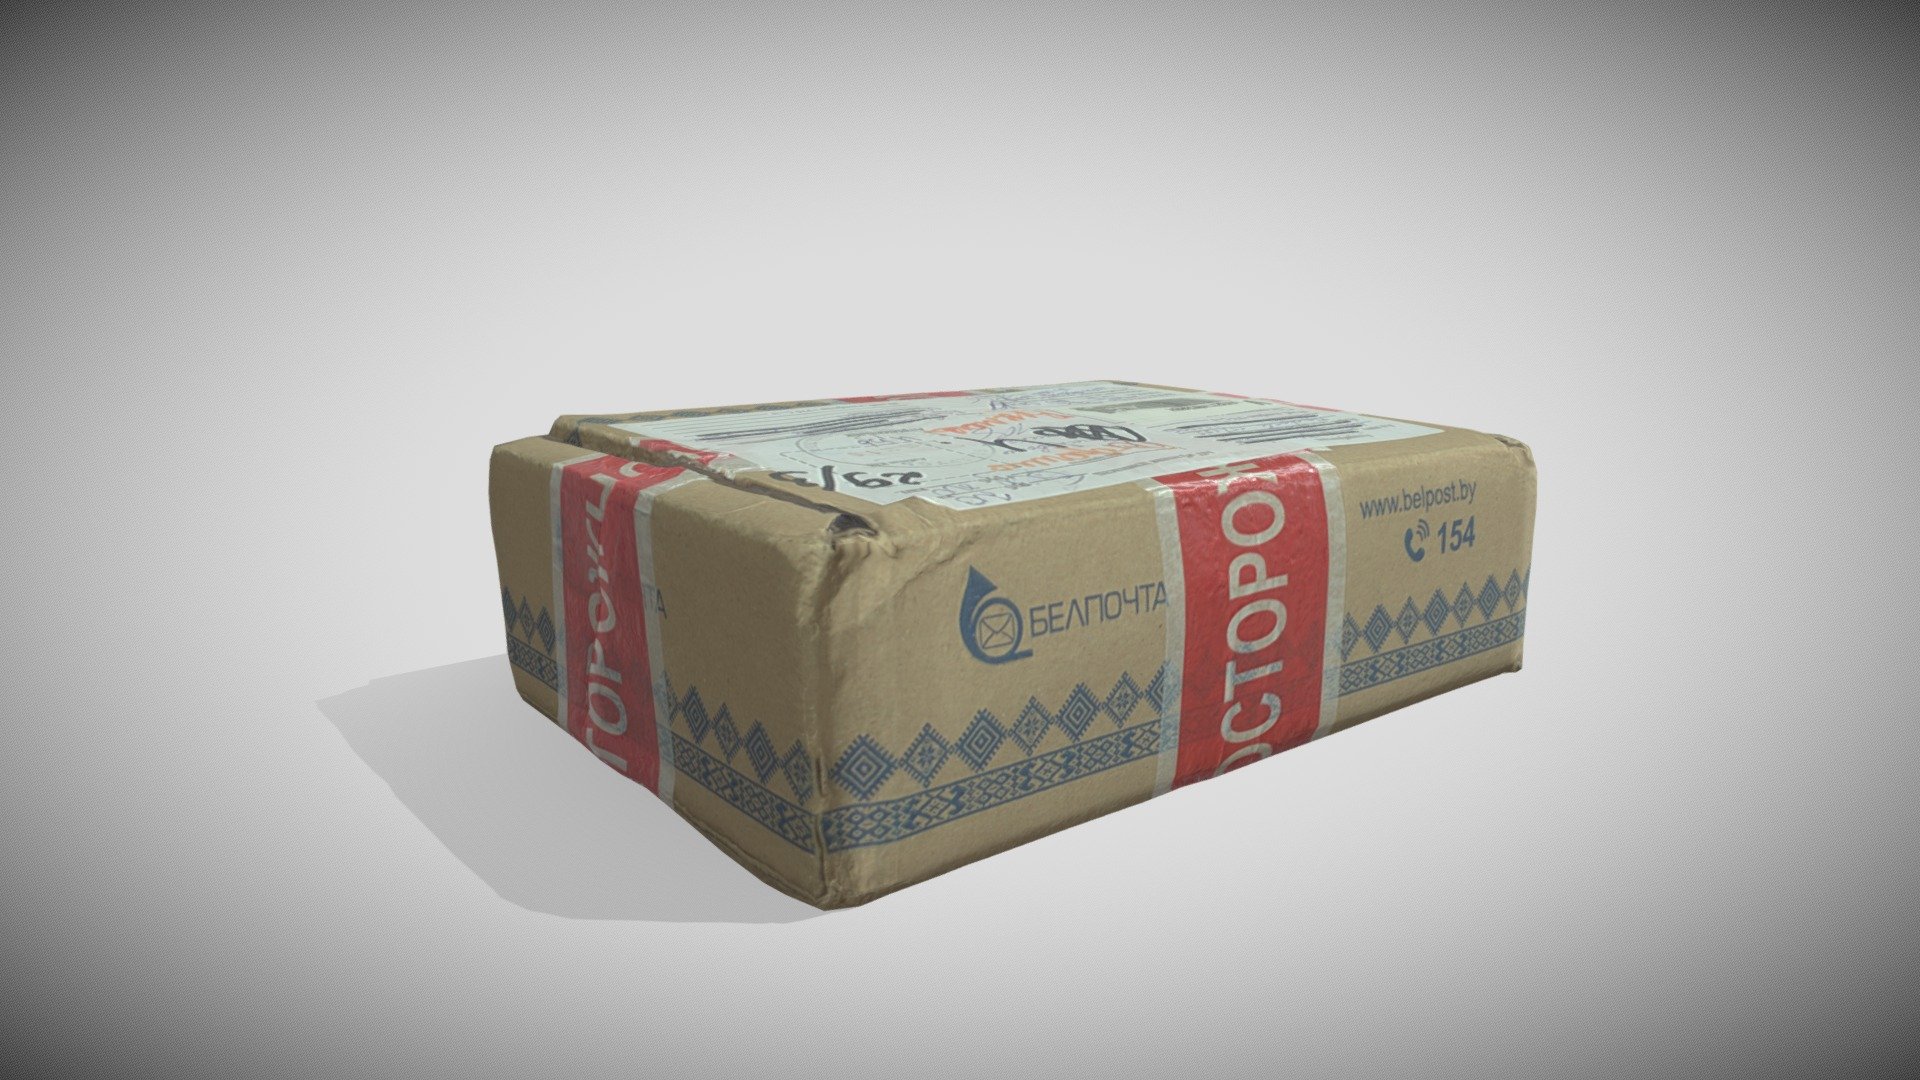 A 3d scan of a Package box. 📦
Great lightweight asset for renders.
Feel free to send Bitcoin or ETH donations.

BTC link bc1qnpamm4ykfus7xk52hpax2e2k005flxl8gyzjl9

ETH link 0xbC09310203C024D969e94f0F8575b79900BE39B6 - Package Box Free - Download Free 3D model by Duppy 3d model